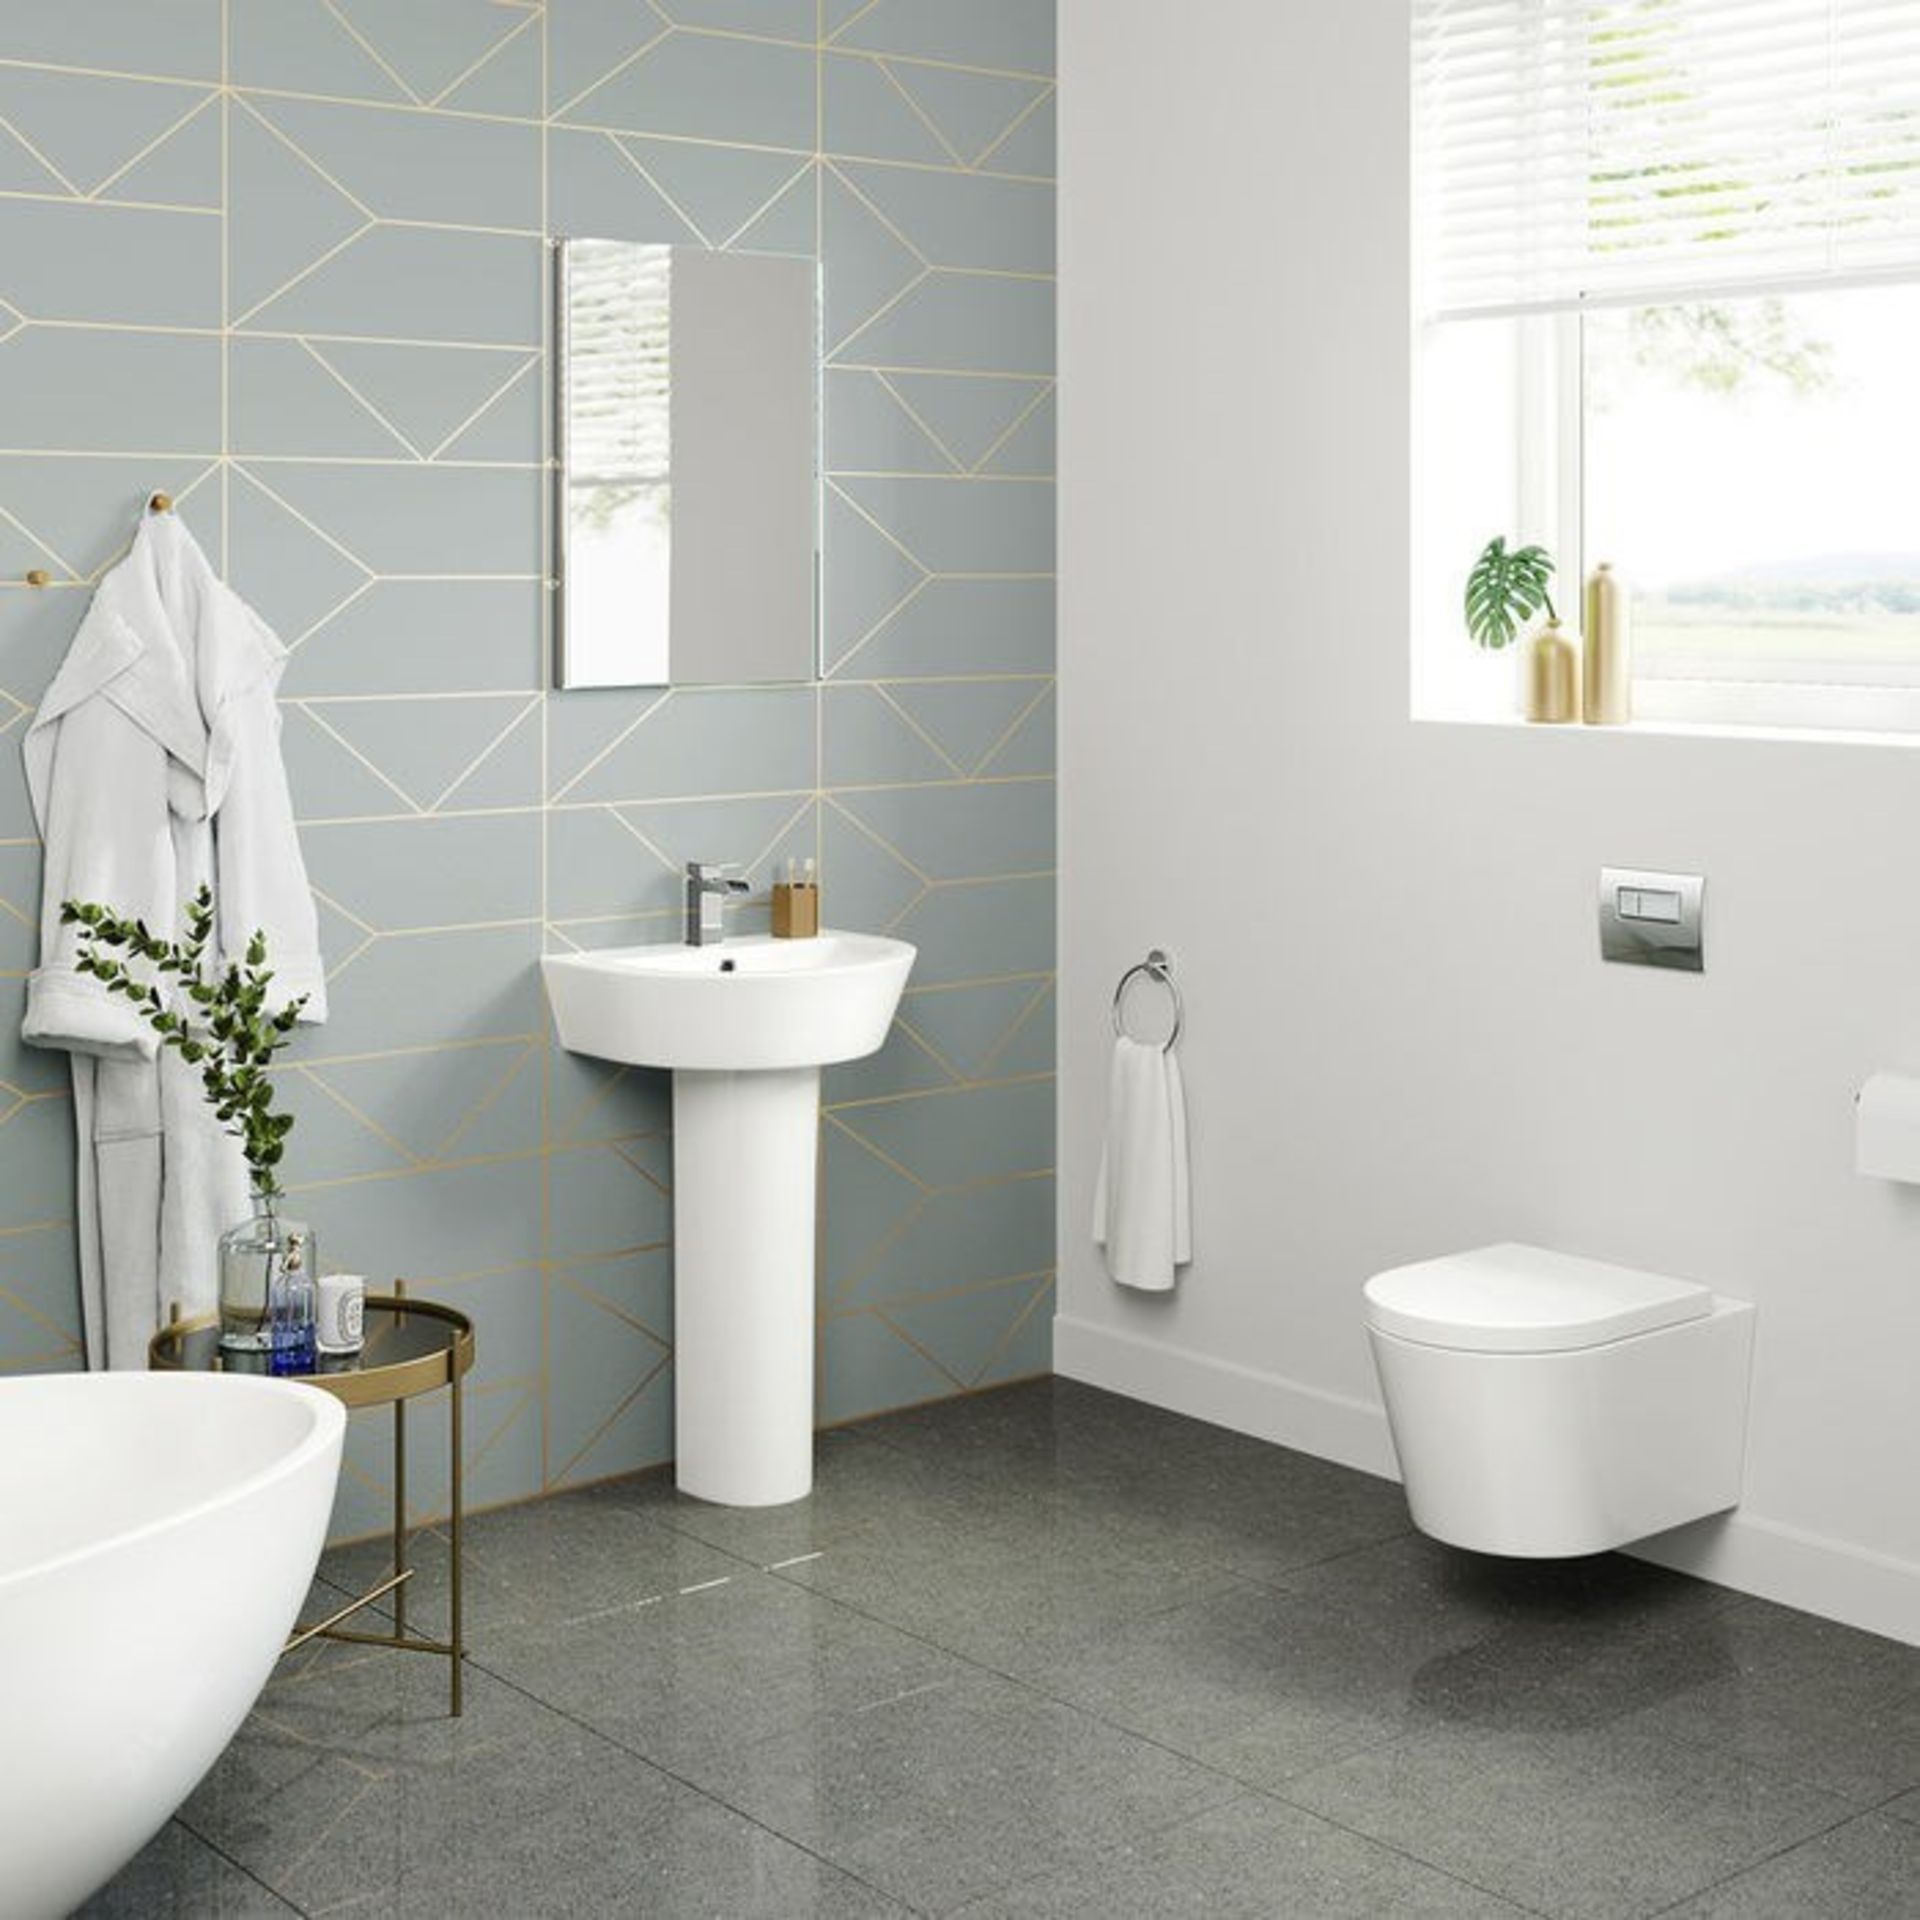 NEW & BOXED Lyon II Wall Hung Toilet inc Luxury Soft Close Seat. RRP £349.99 each.We love thi... - Image 2 of 2